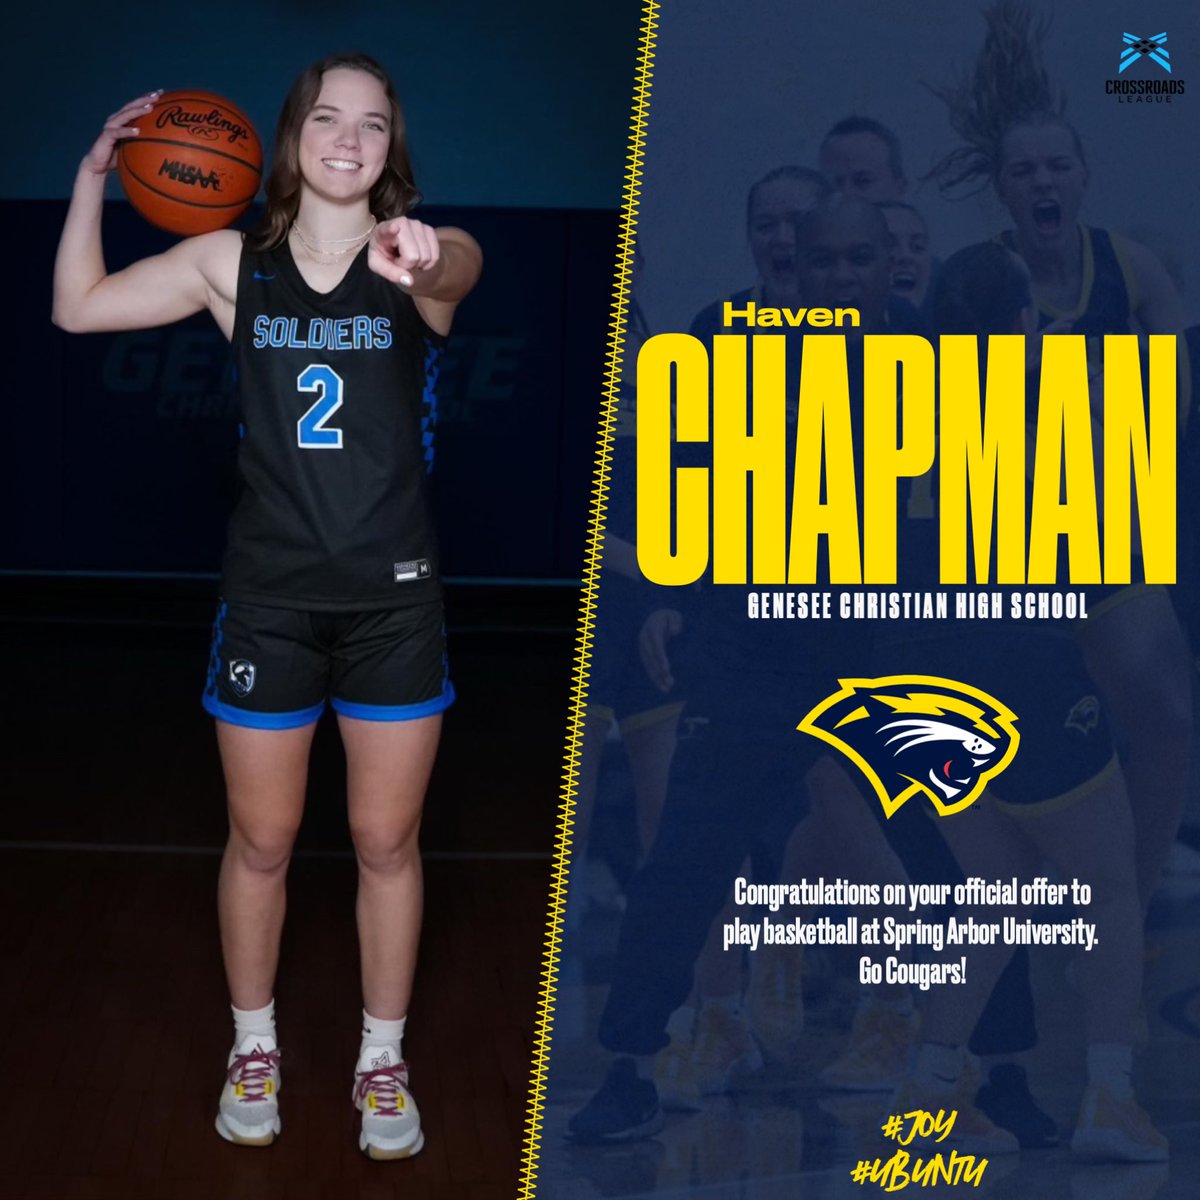 After a great call with coach Williams, I am grateful to receive an offer to continue my athletic and academic career at Spring Arbor University. Go Cougars! @SAUCougarsWBB 💛